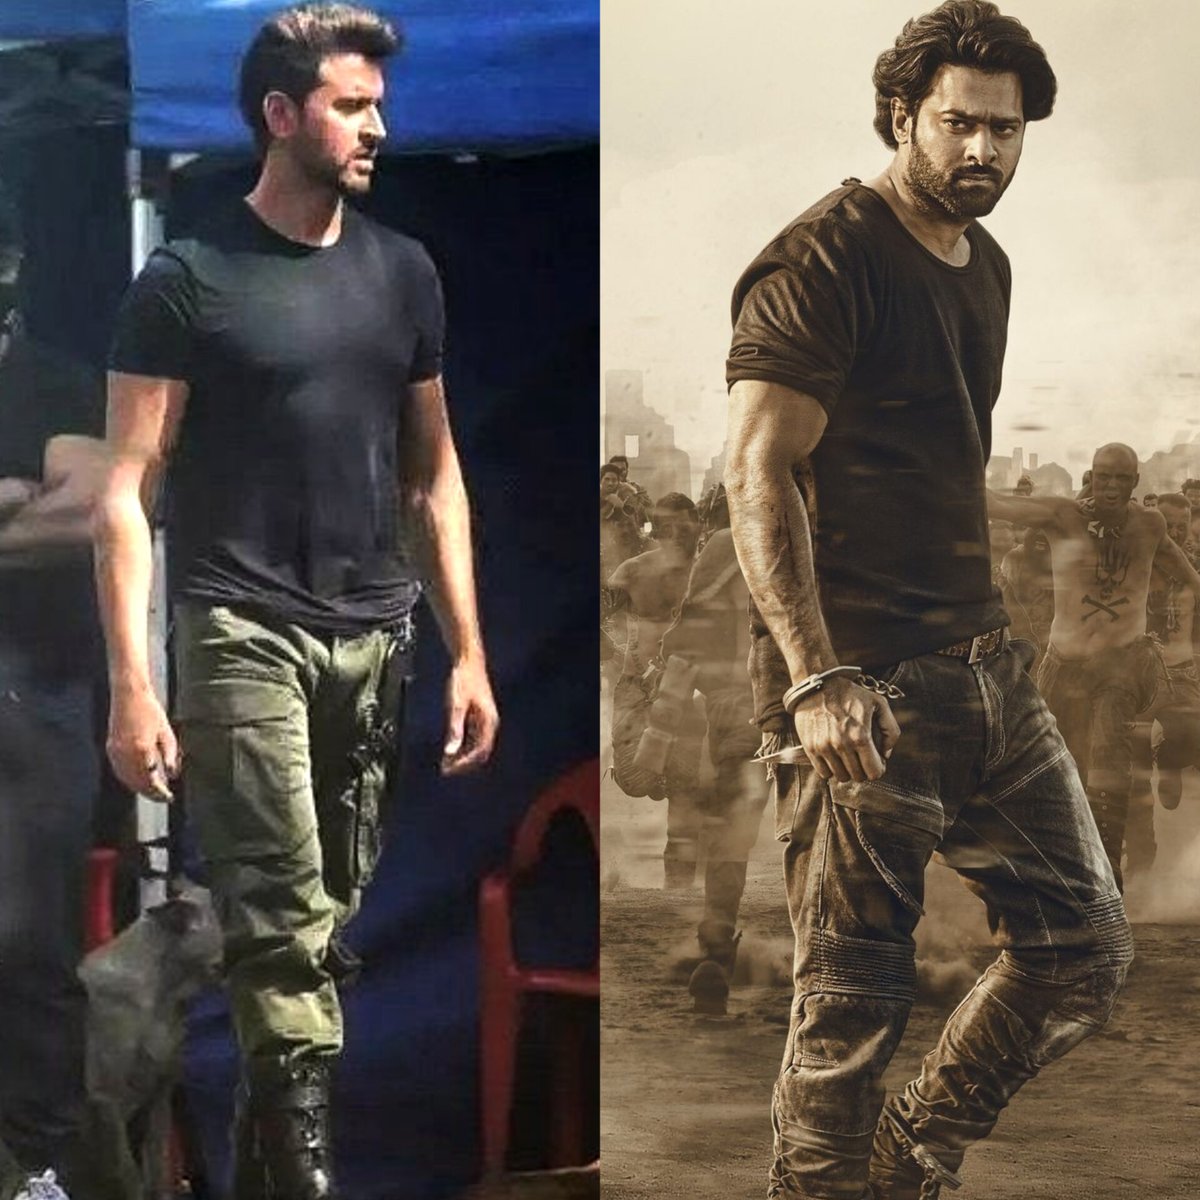 No Indian Actor has the calibre to Dominate these Cutouts 🥵 #Prabhas #HrithikRoshan